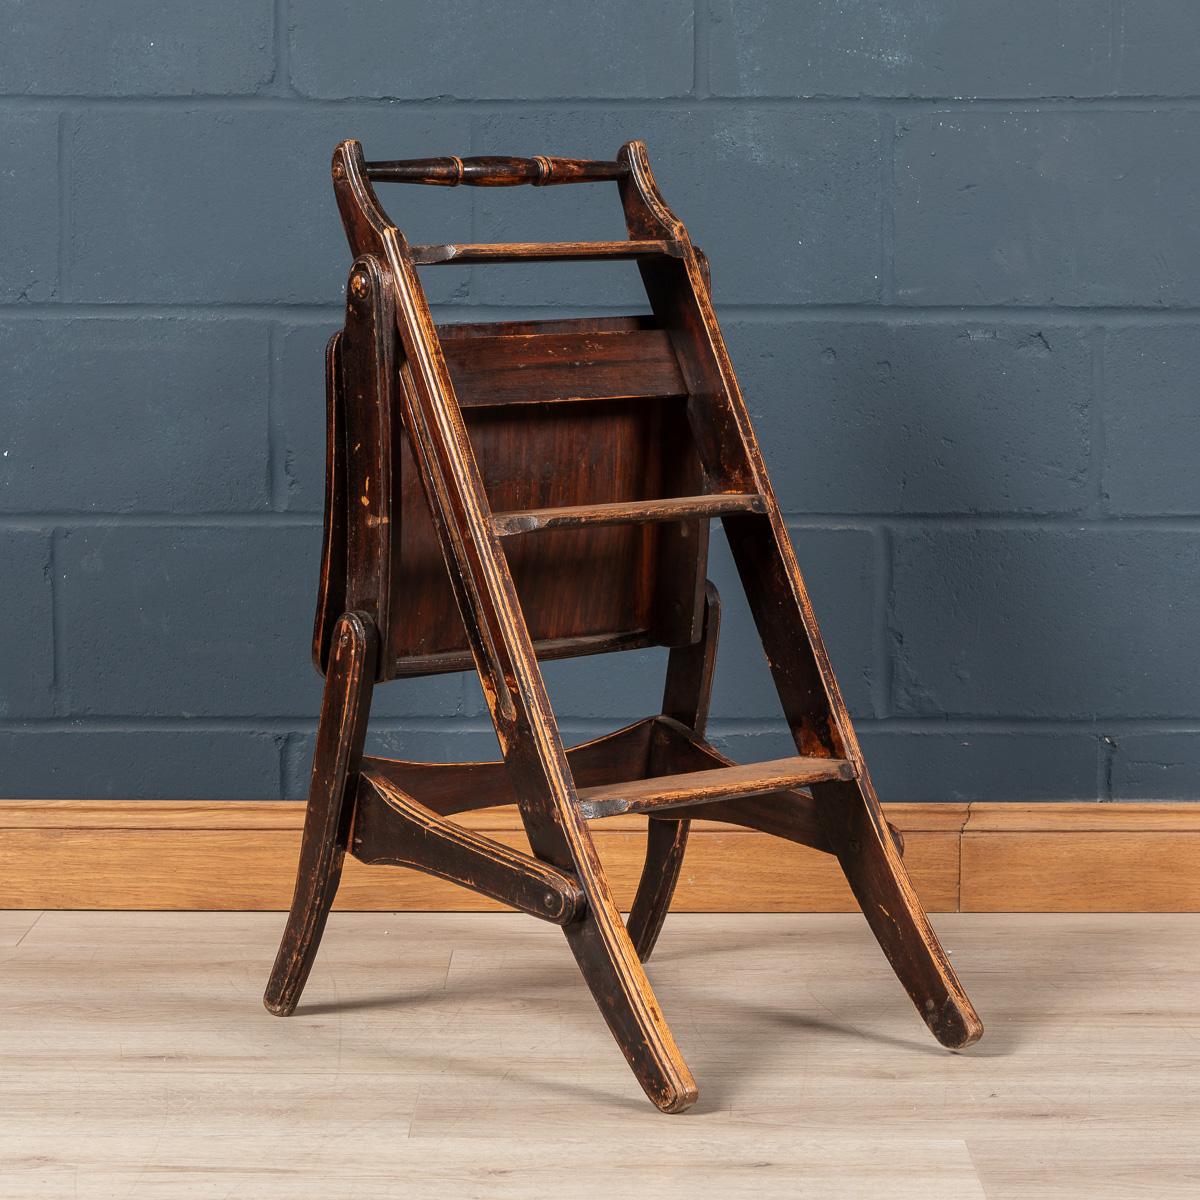 A very unusual oak “metamorphic“ library chairs dating to the late 19th / early 20th century. With the simplest of movements this chair transform from a comfortable reading chair to a lovely set of library steps. A curious dual use object which is